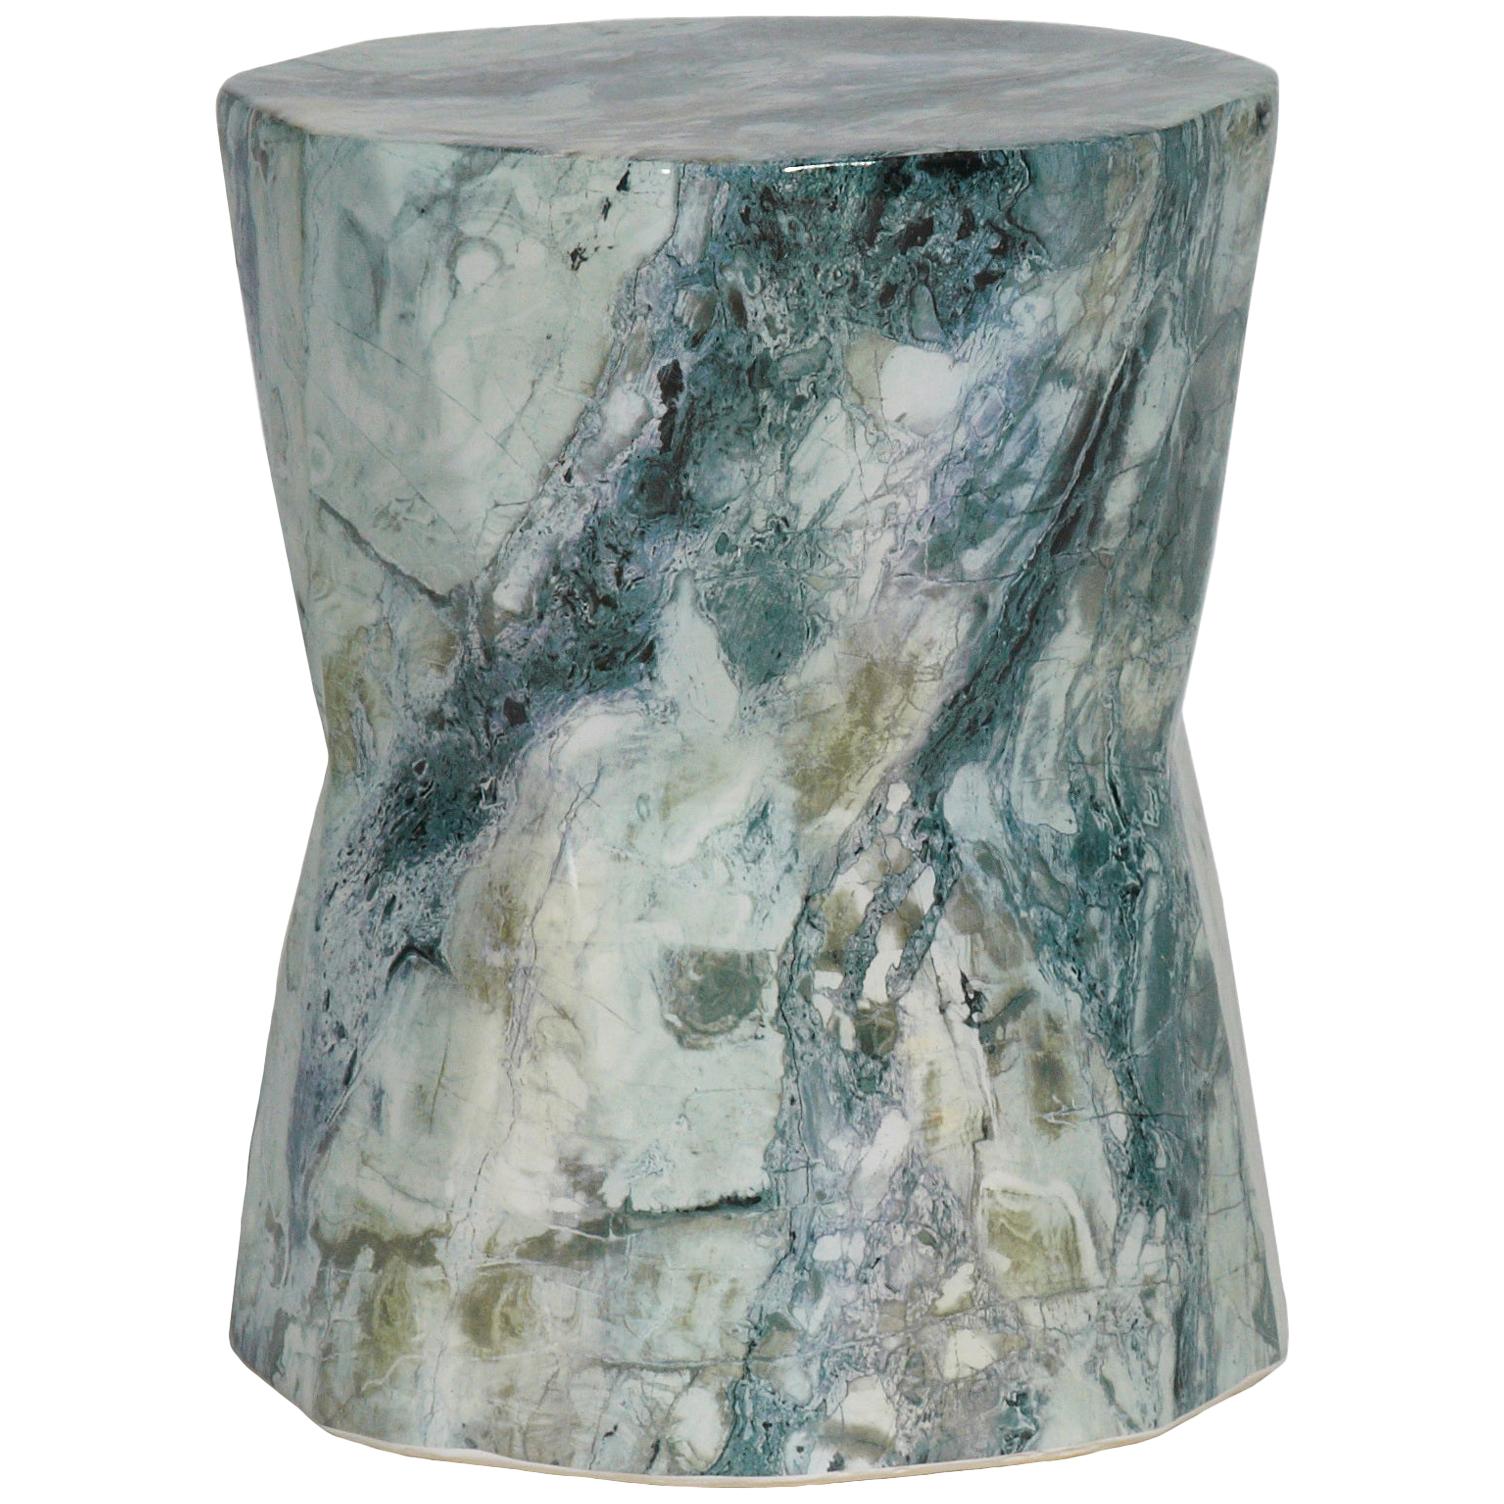 Arnold Porcelain Garden Stool in Marble Blue, Gray, and White by CuratedKravet